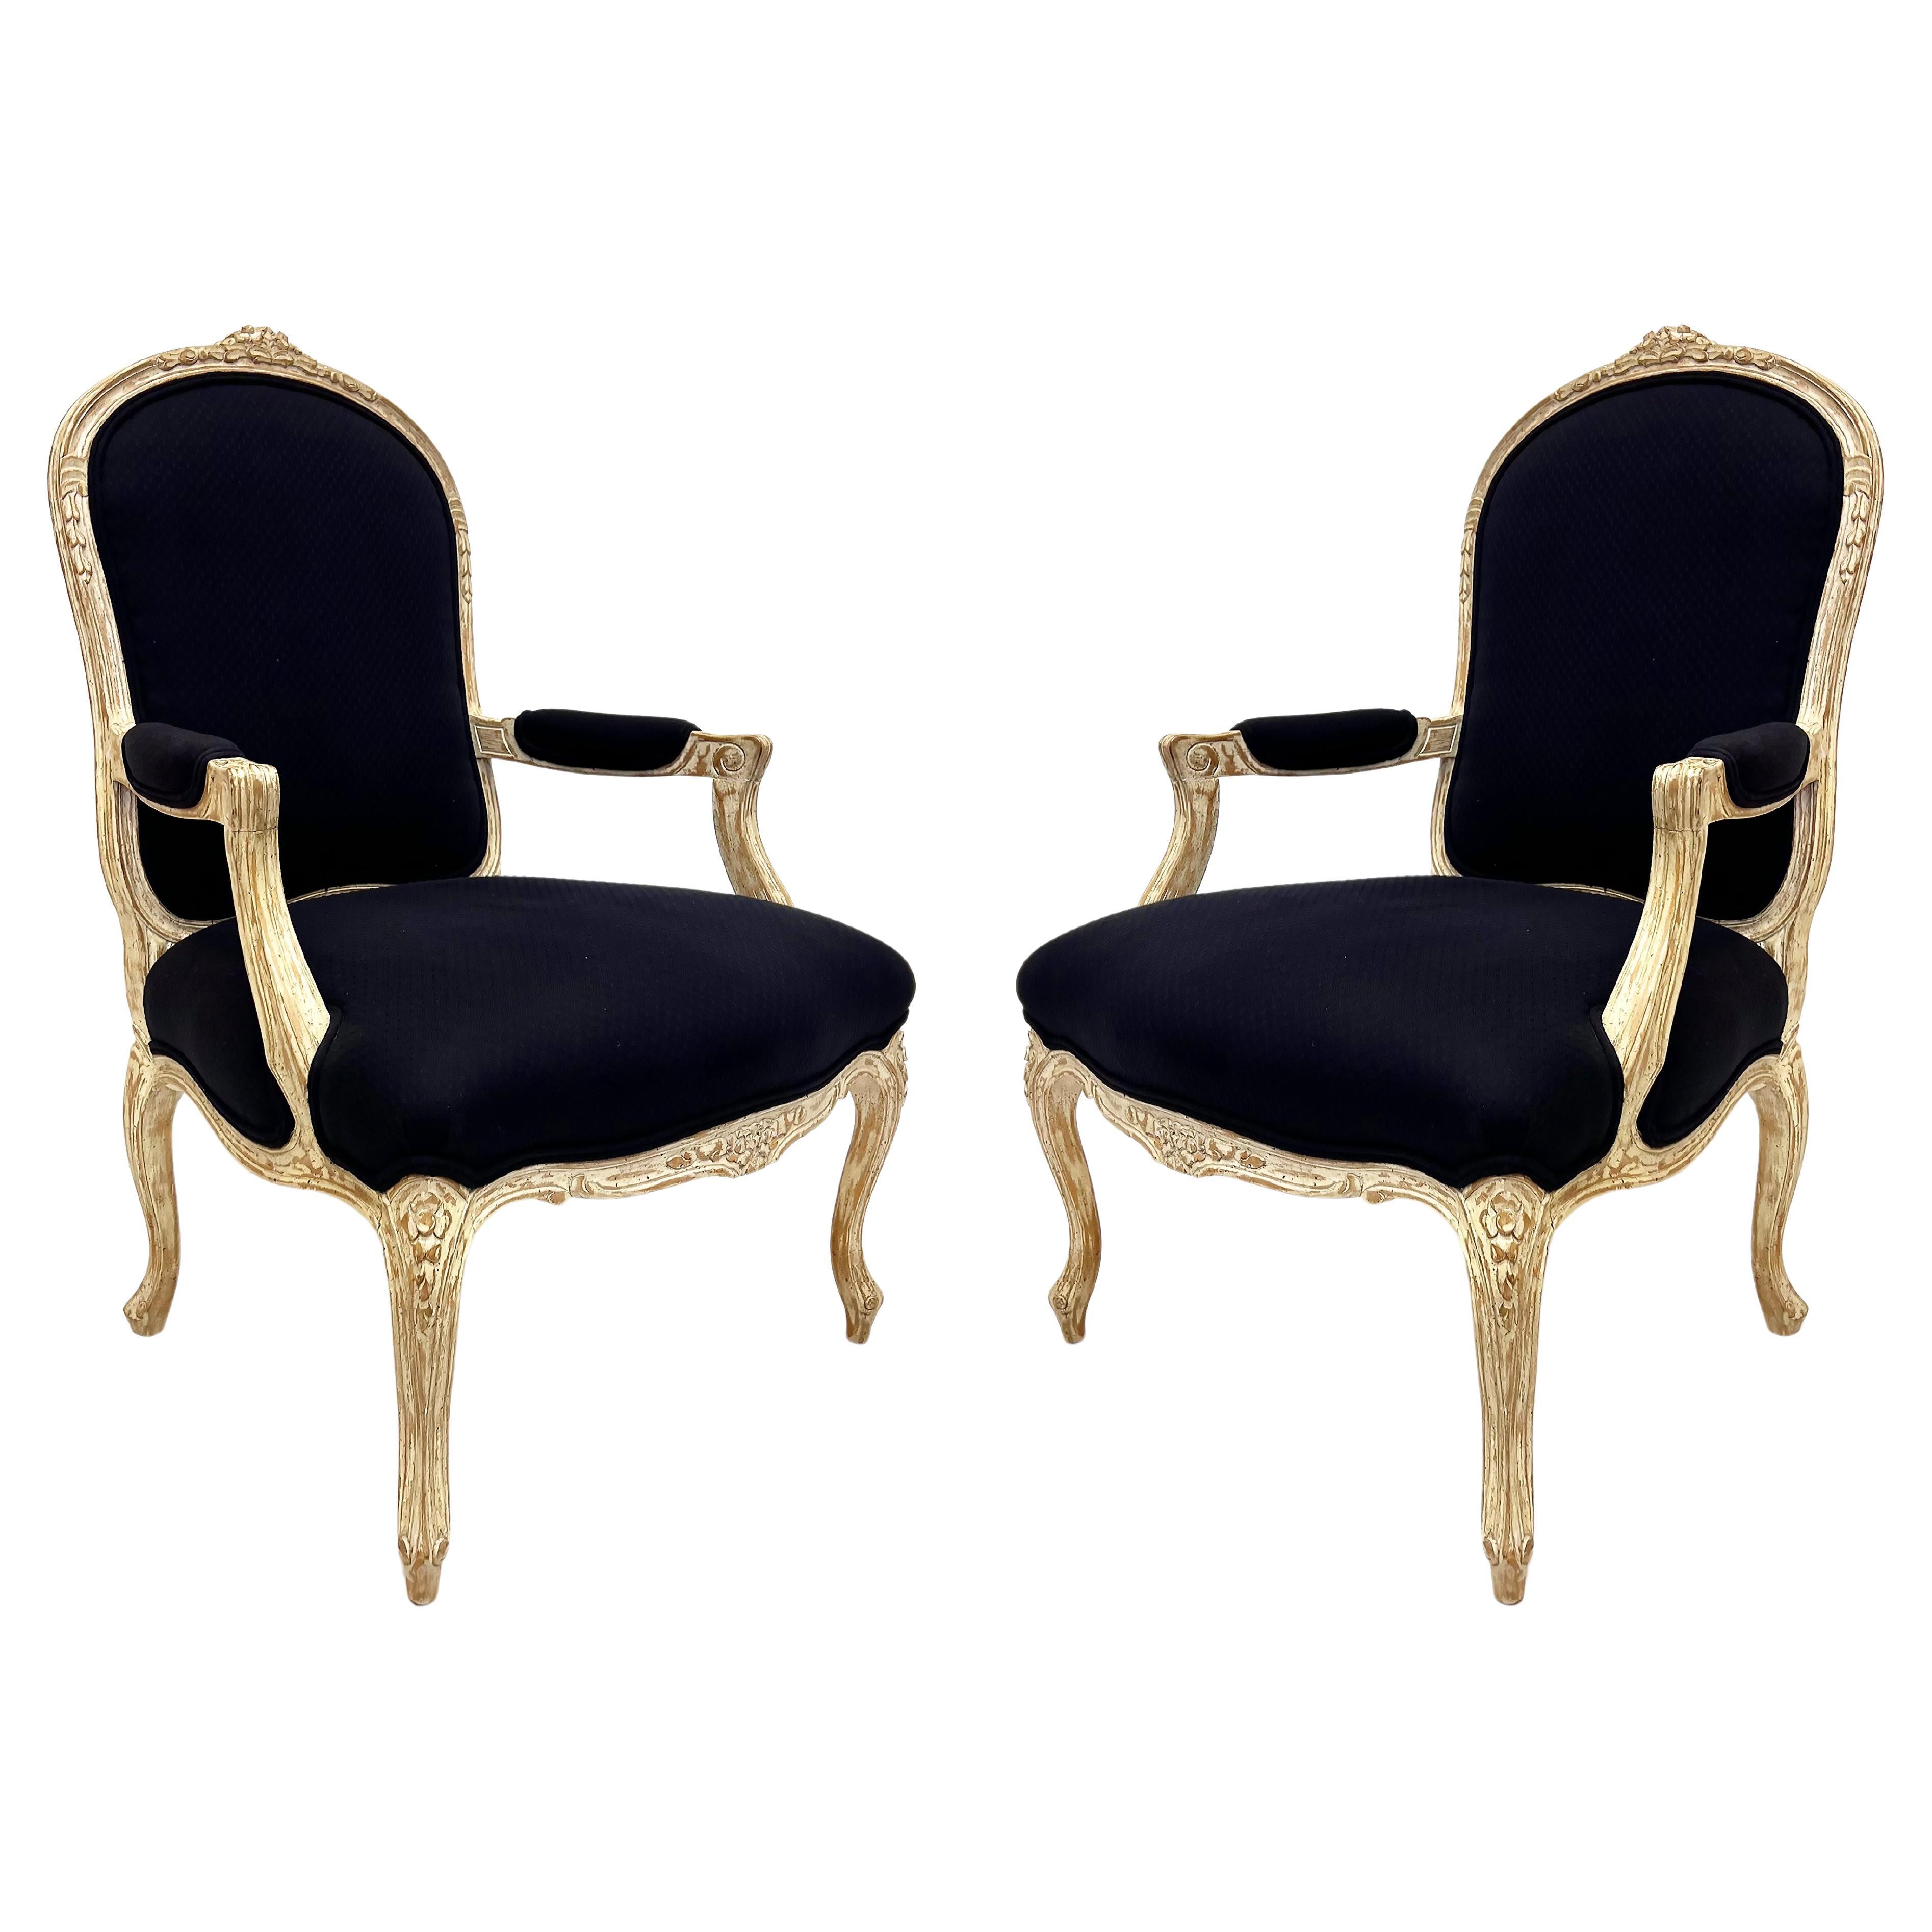 Substantial Vintage Louis XV Style Fauteuil Chairs, Large Scale Pair For Sale